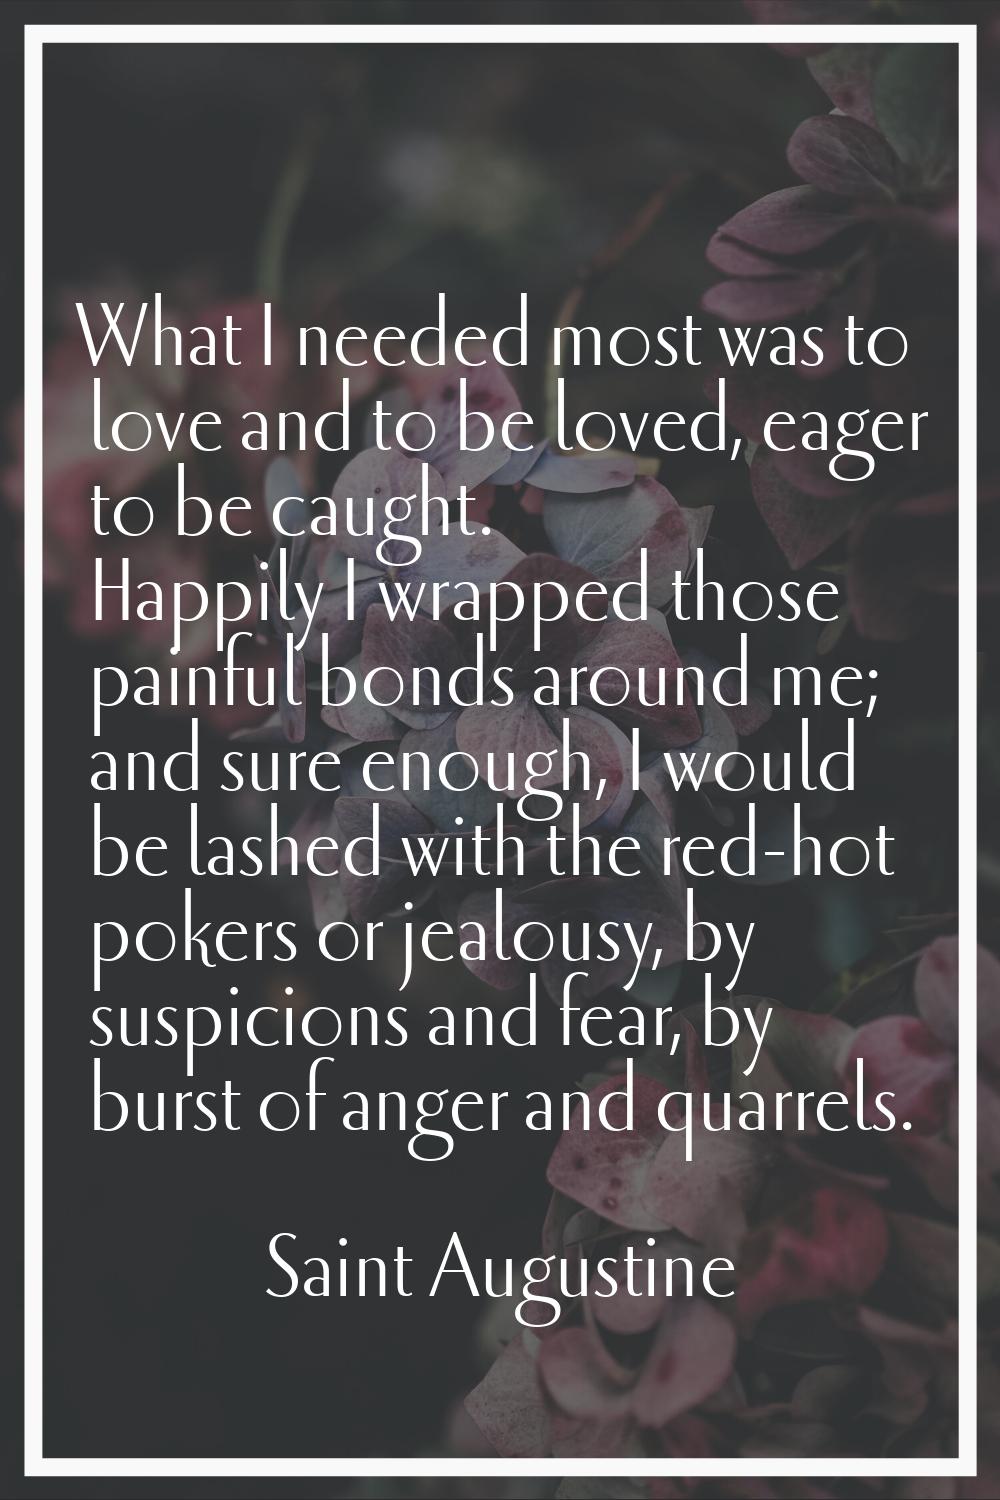 What I needed most was to love and to be loved, eager to be caught. Happily I wrapped those painful